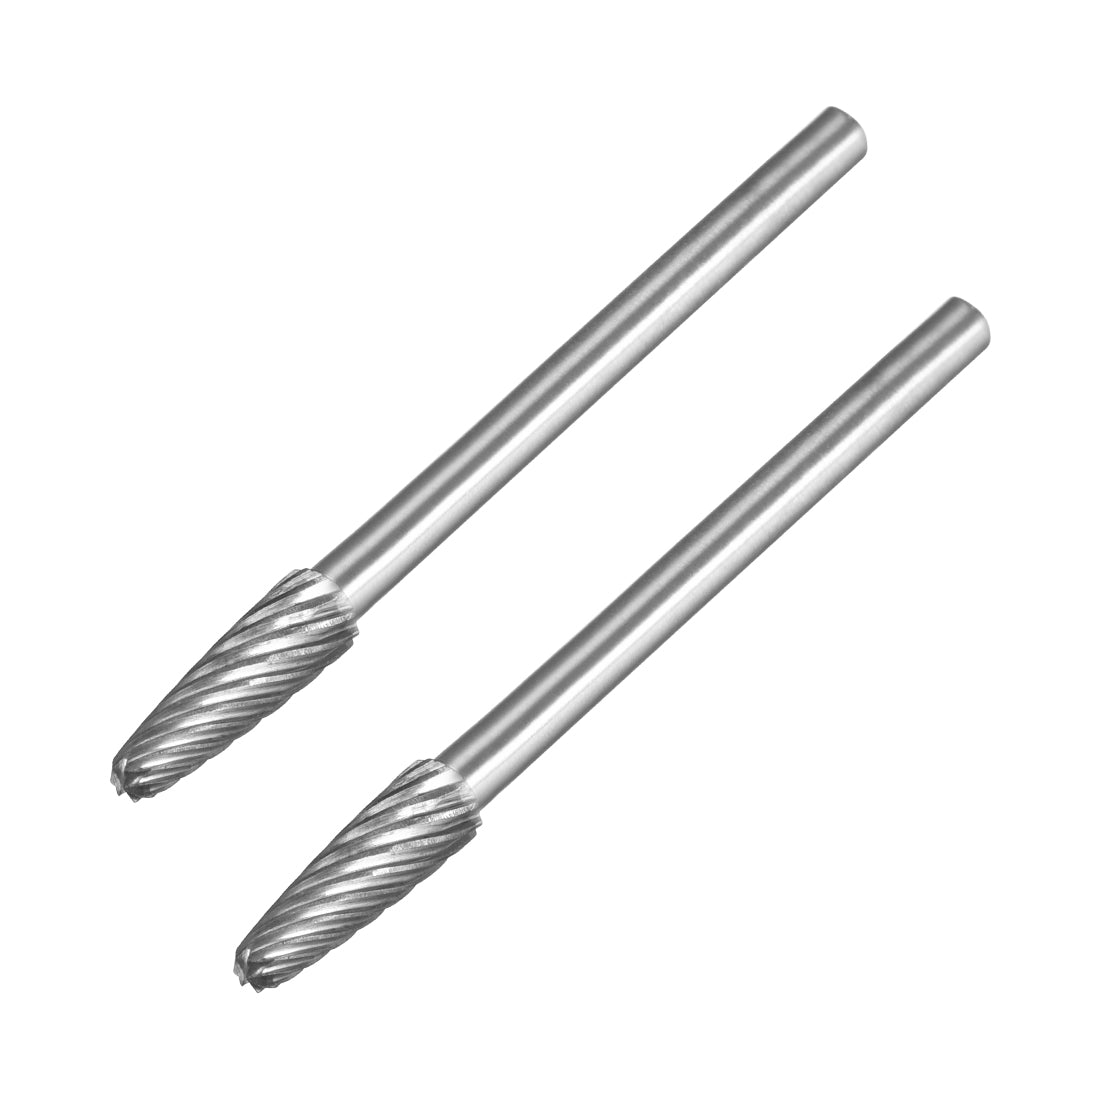 uxcell Uxcell Single Cut Rotary Burrs File Tree Shape with 1/8" Shank and 4 mm Head Size 2pcs